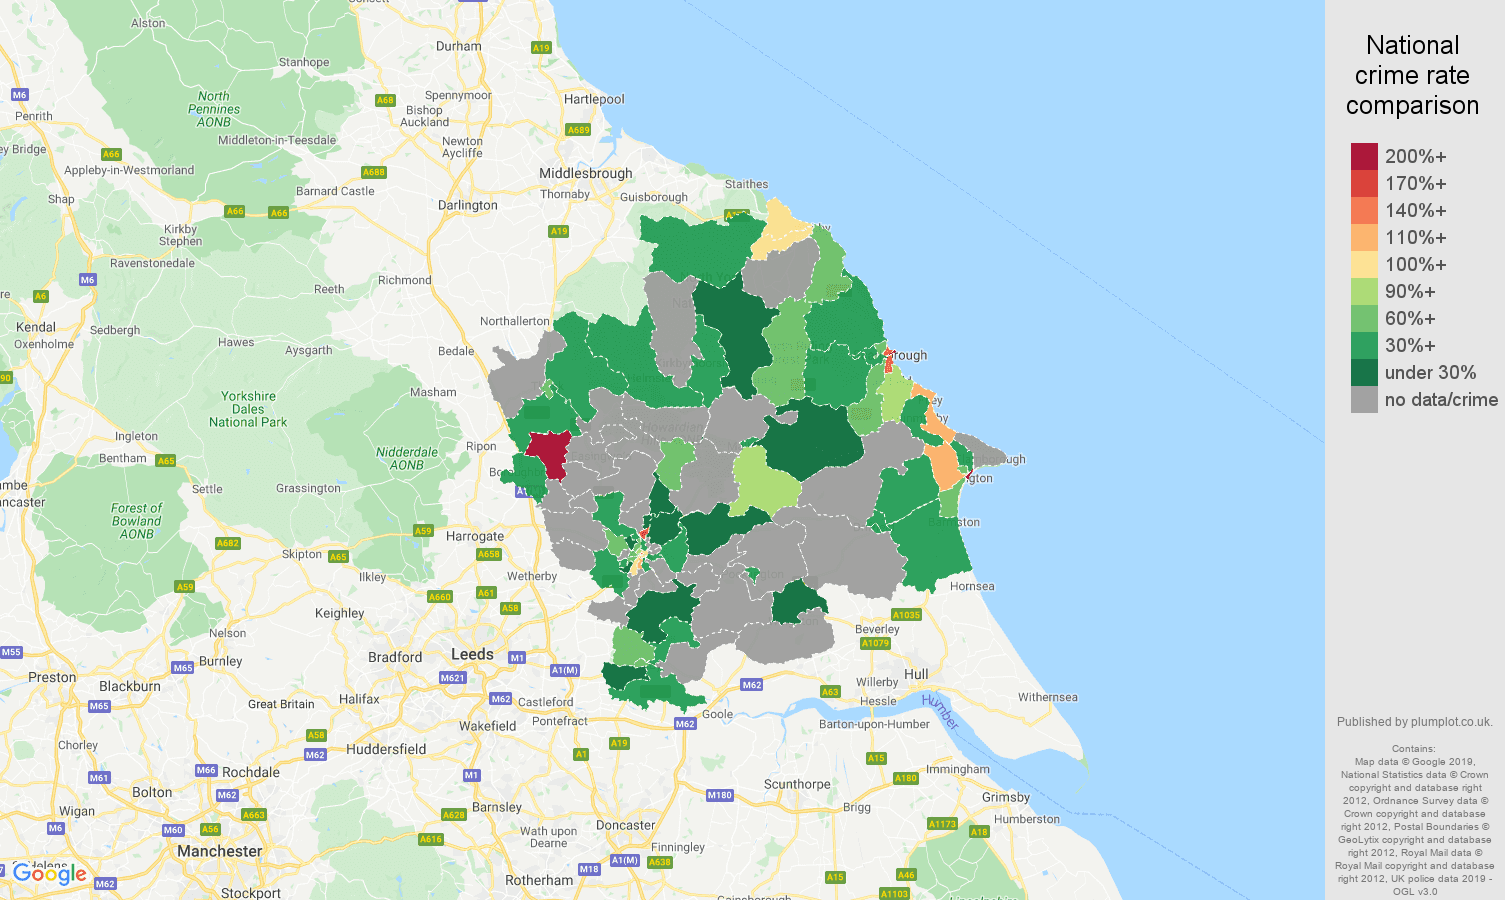 York possession of weapons crime rate comparison map